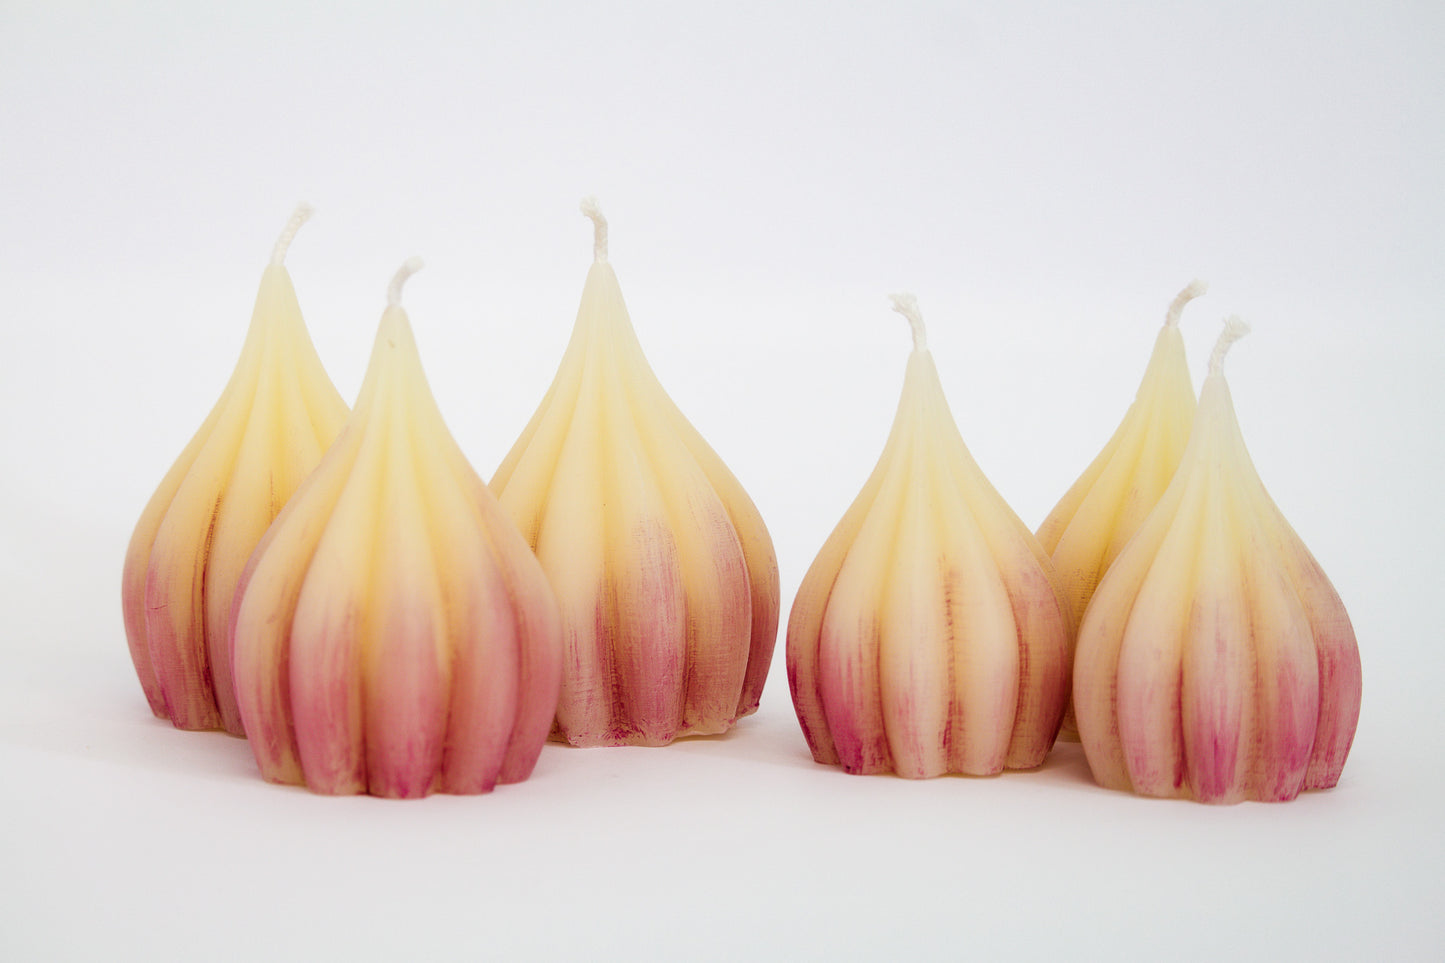 Garlic-shaped white beeswax candles painted with some purple. Three large on left and three smaller ones on right